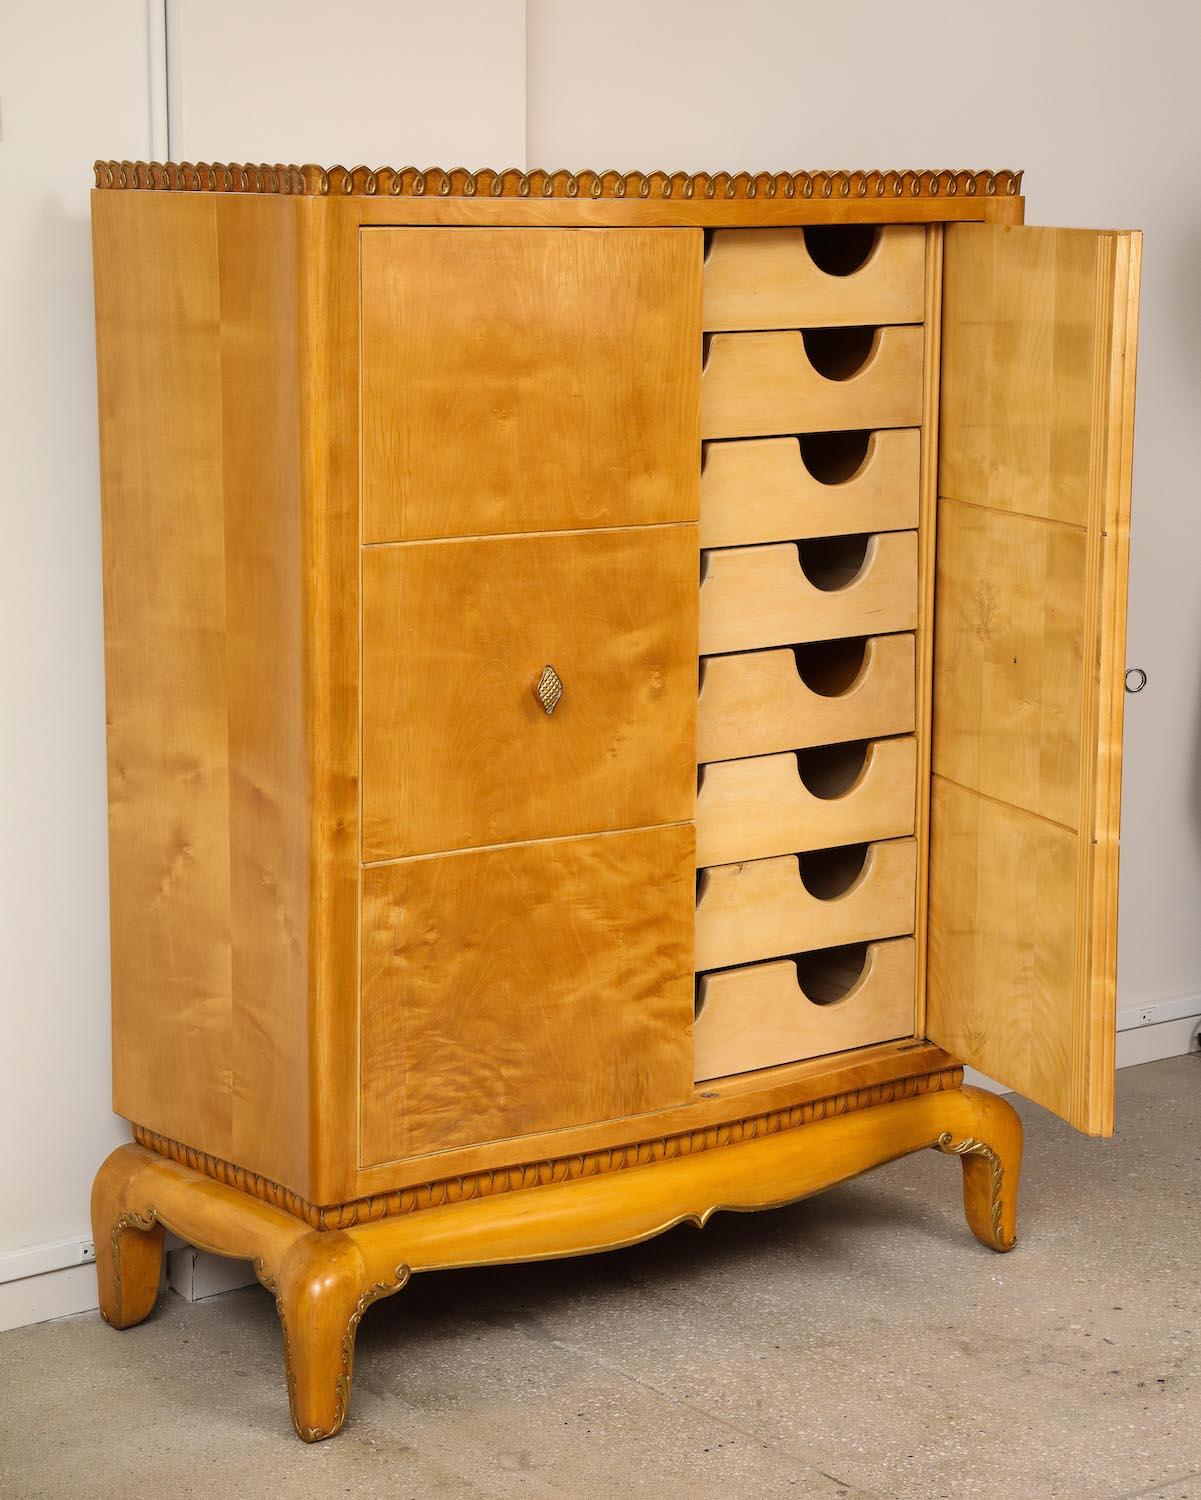 Wardrobe Unit by Osvaldo Borsani for ABV. Maple, burled maple, painted wood. Cabinet with stylized feet, carvings and gold-painted accents. Doors open to reveal 8 interior drawers. Exterior wood has been recently refinished.
Provenance: Borsani